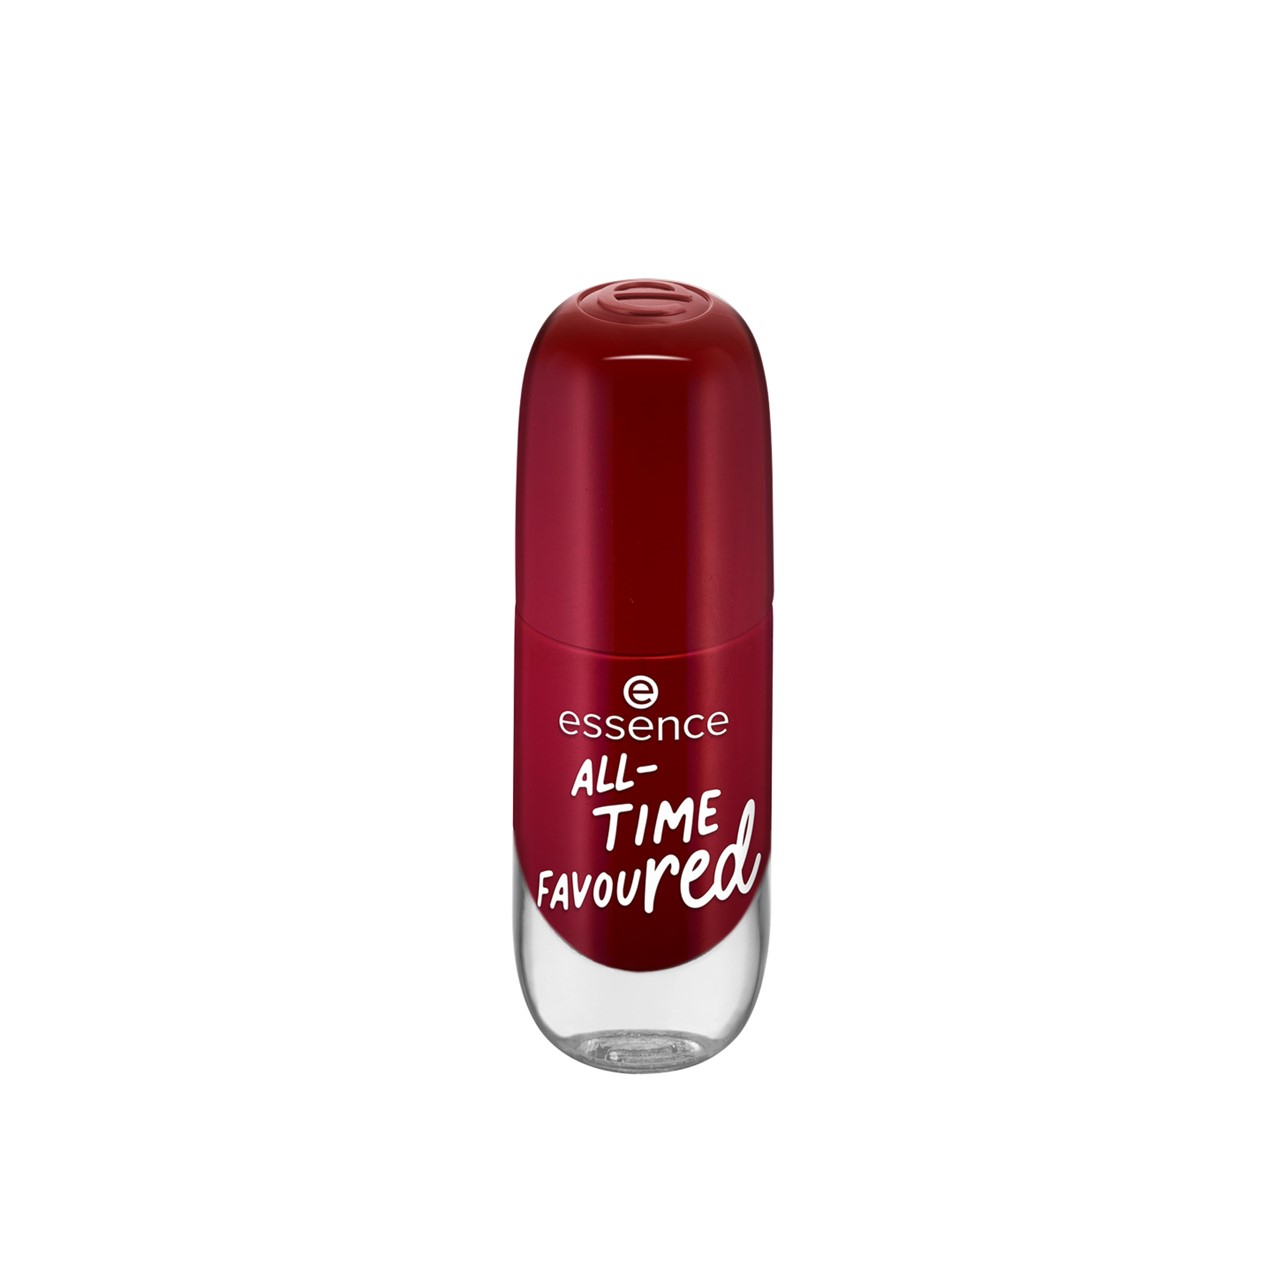 essence Gel Nail Colour 14 All-Time FavouRed 8ml (0.27oz)